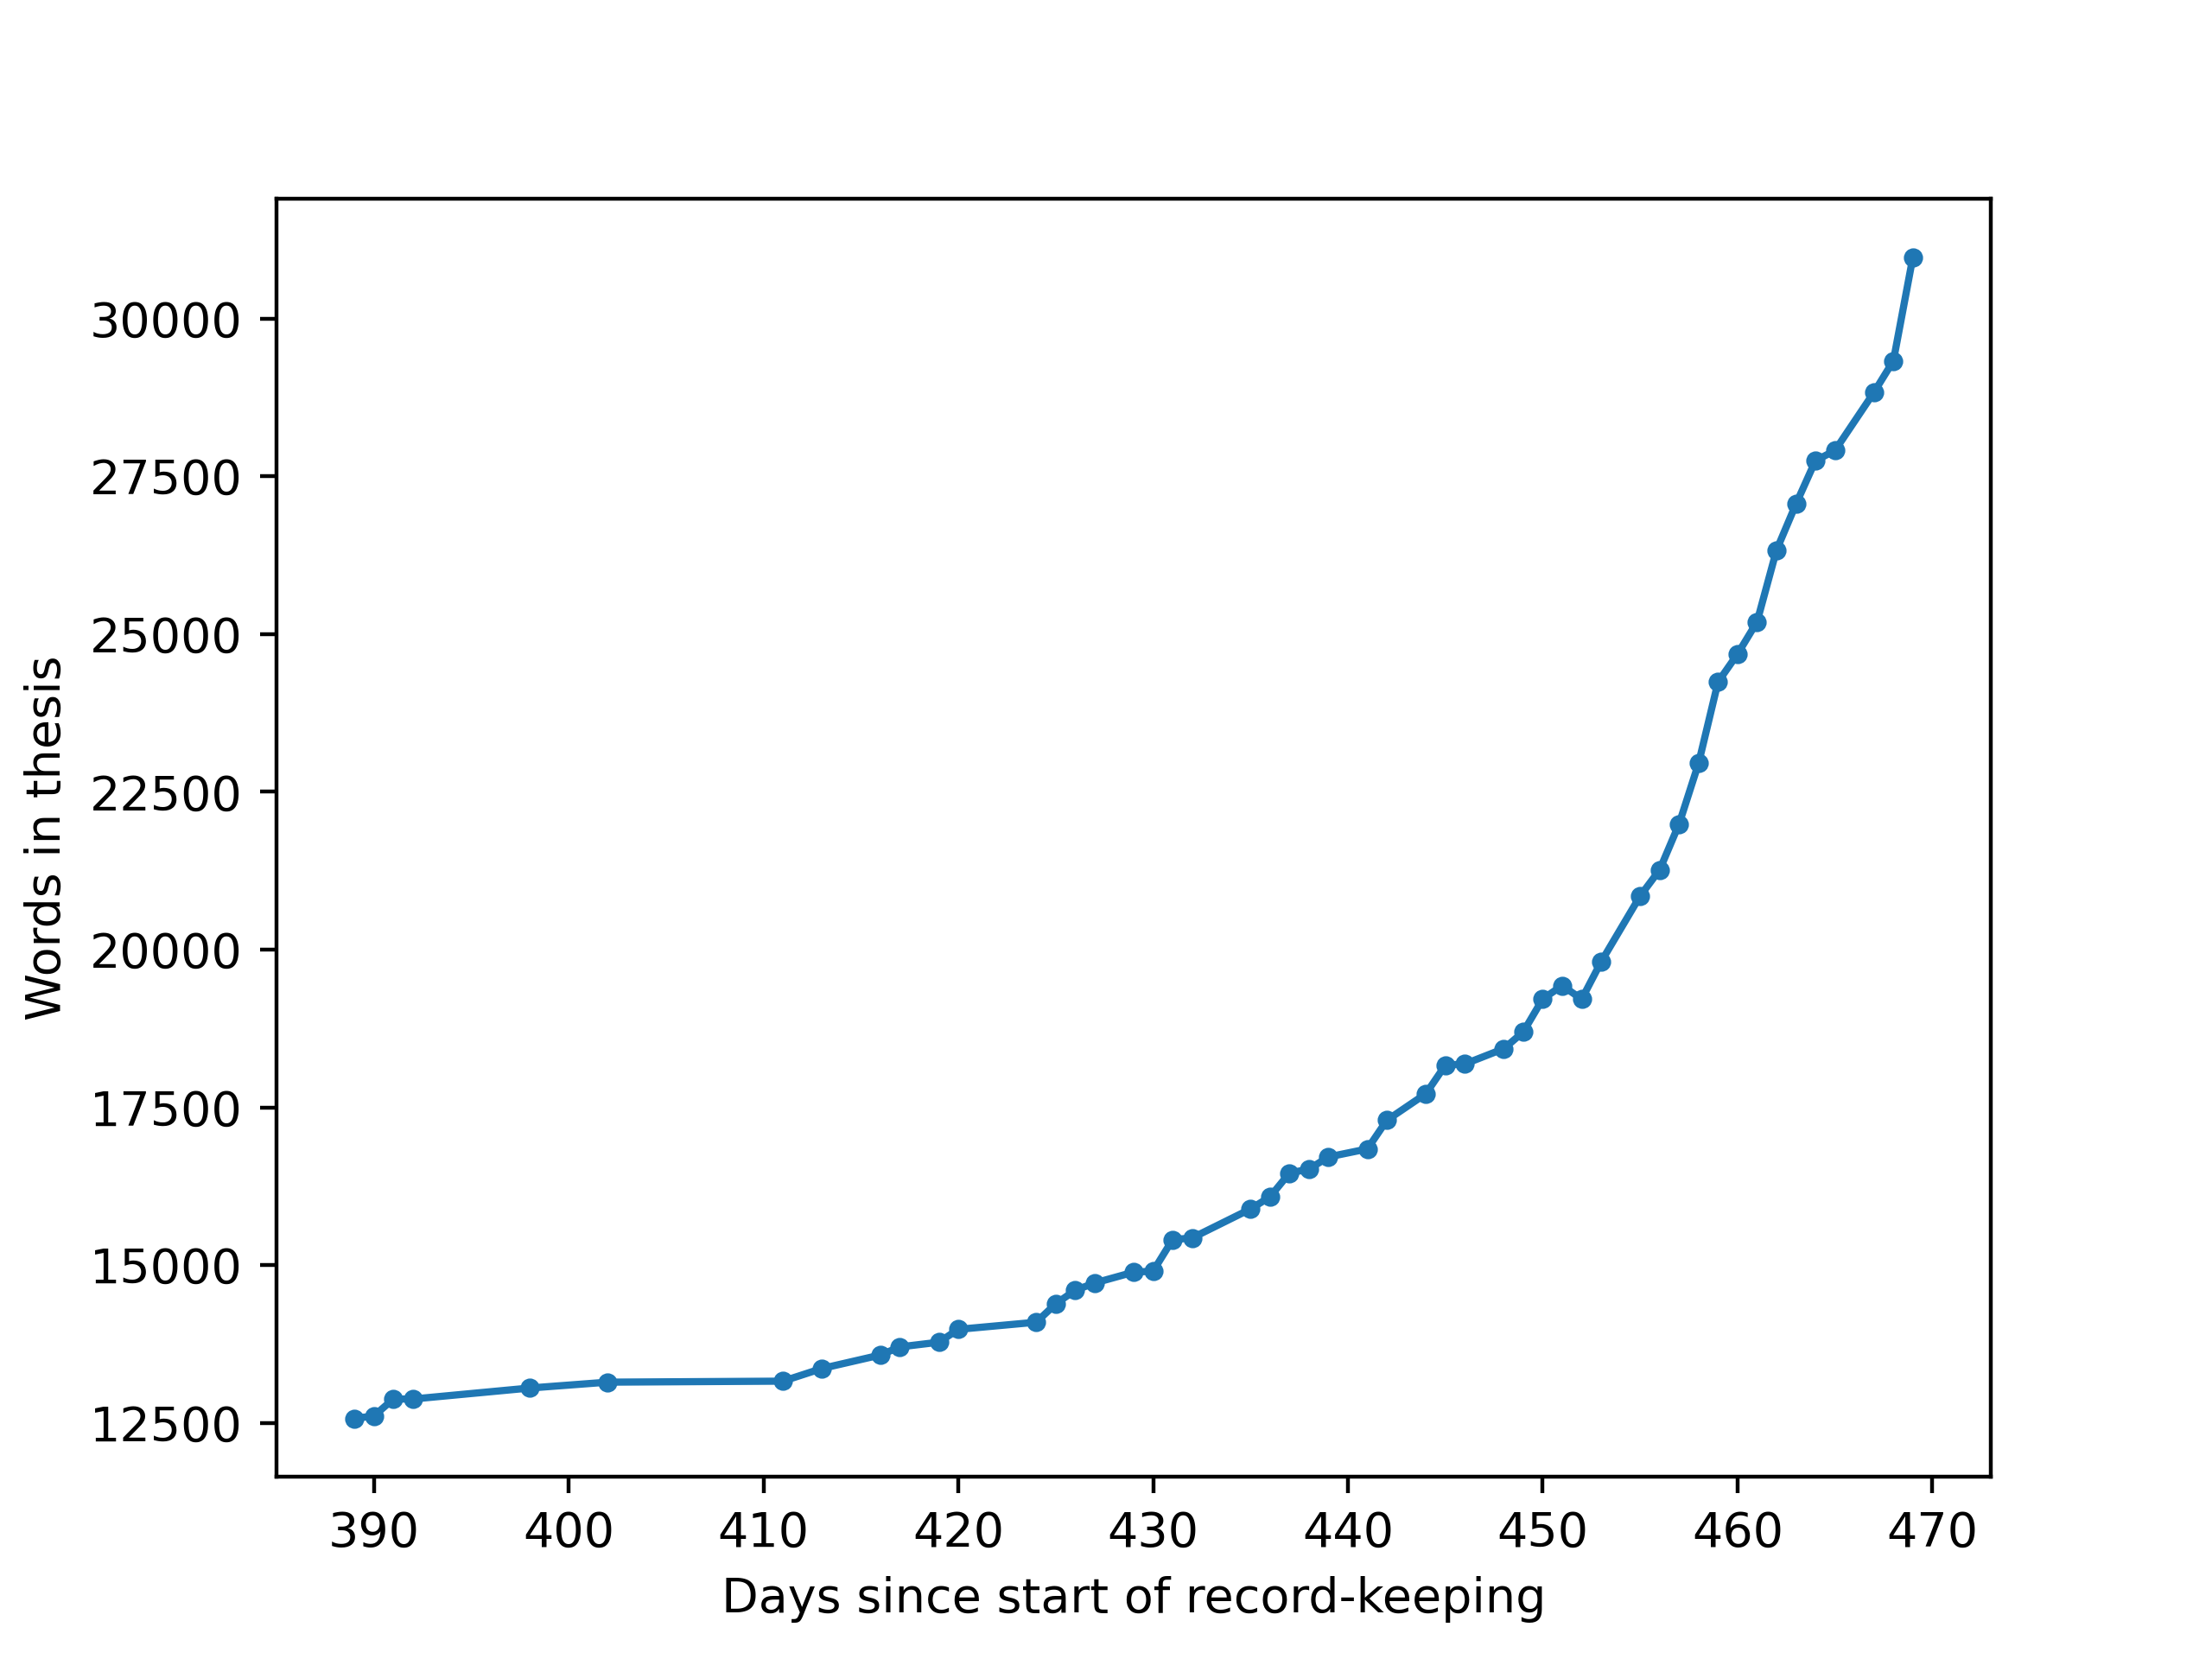 Zoomed in plot of word count for dissertation